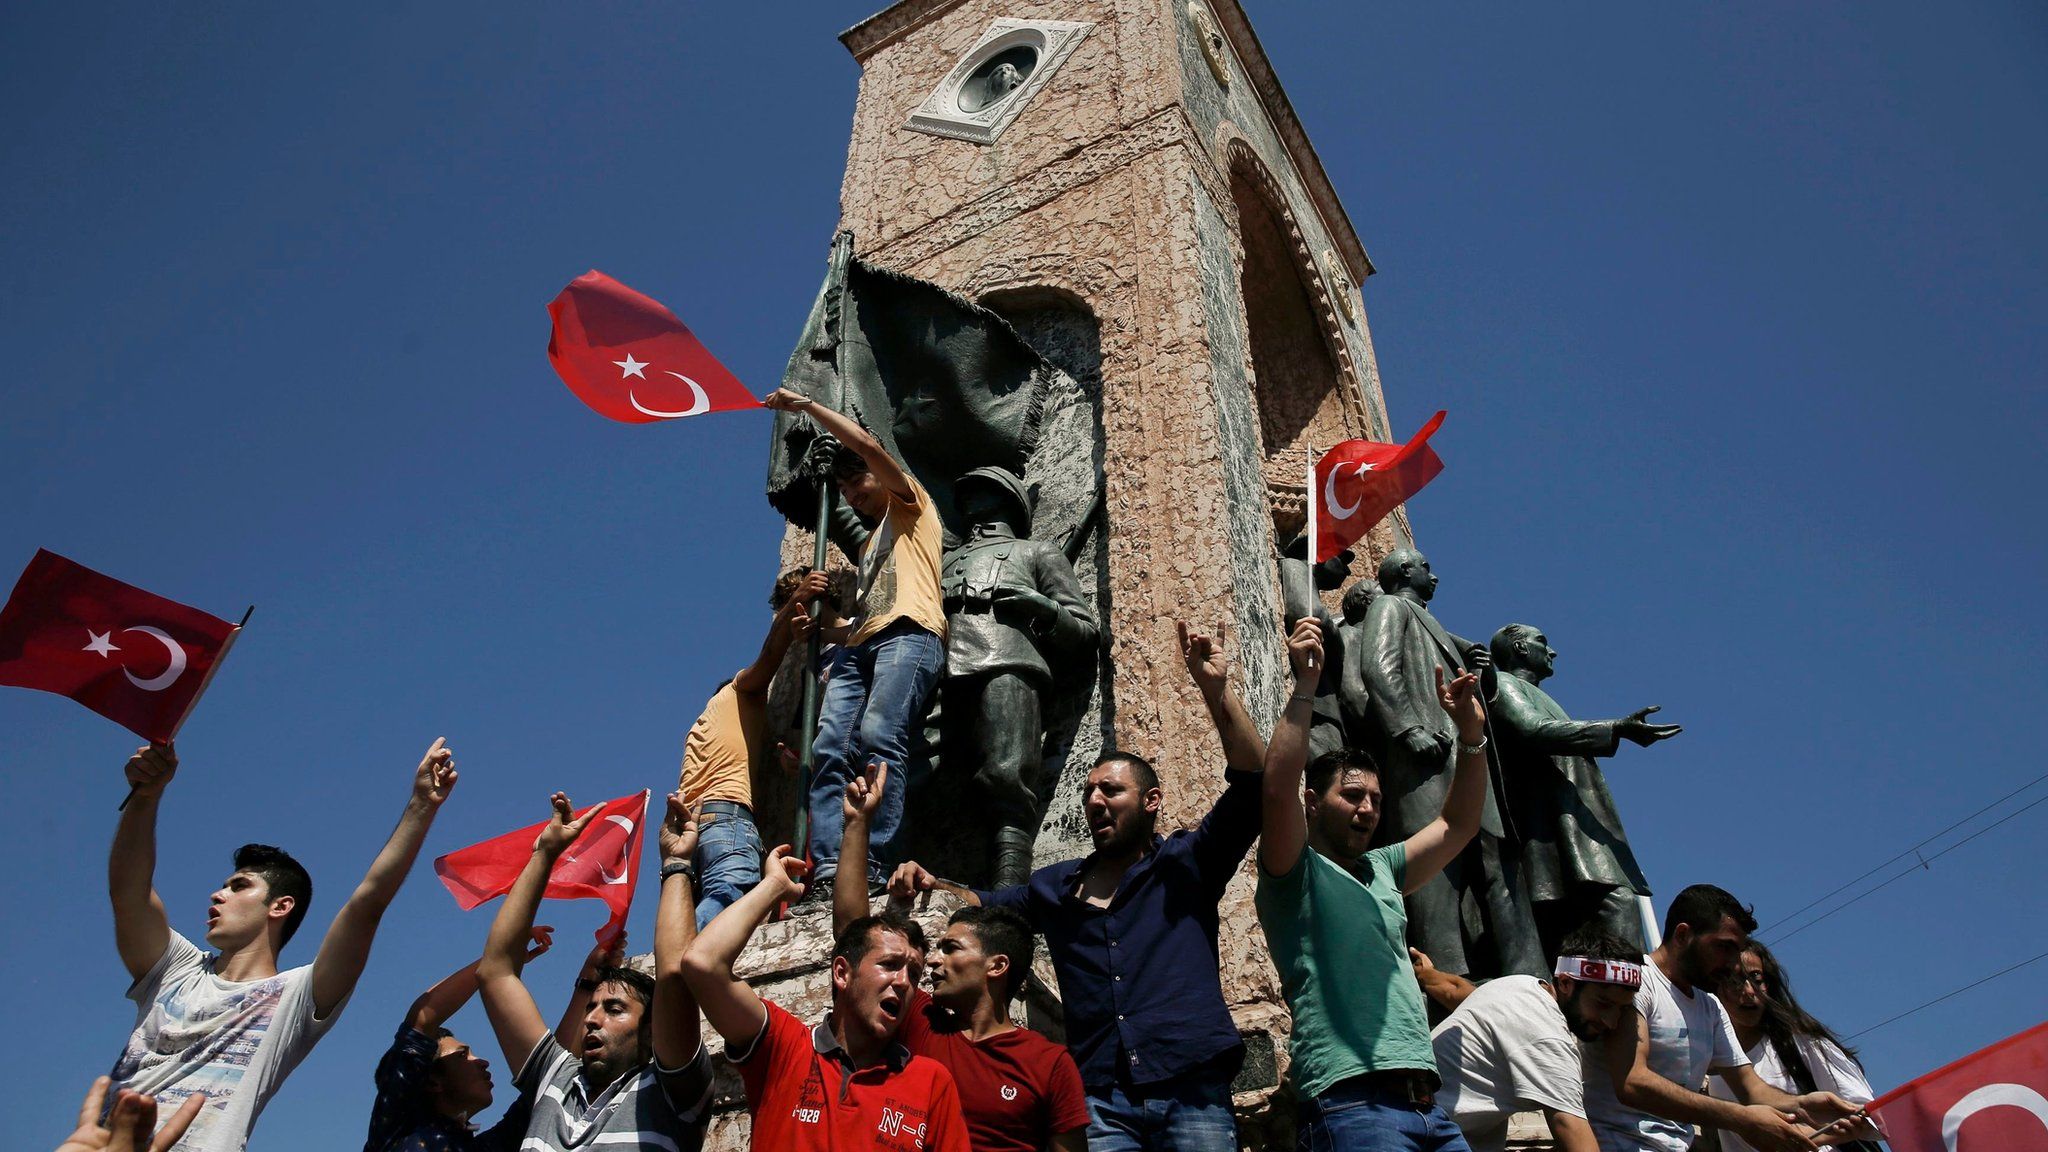 People gathered on a monument in Taksim Square